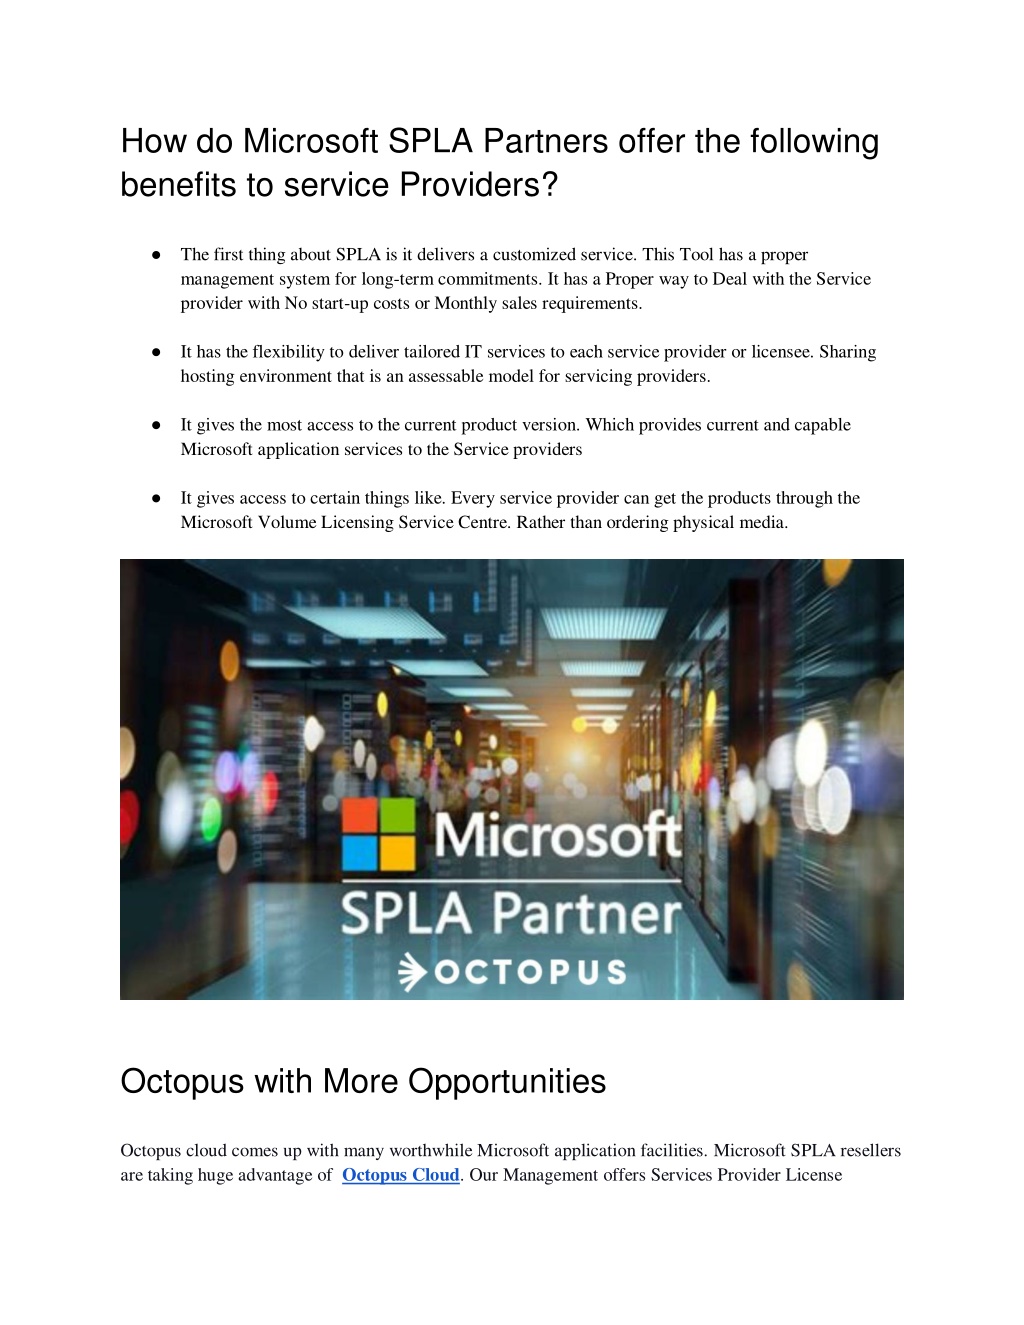 PPT Microsoft SPLA Partner application approachable by Octopus Cloud